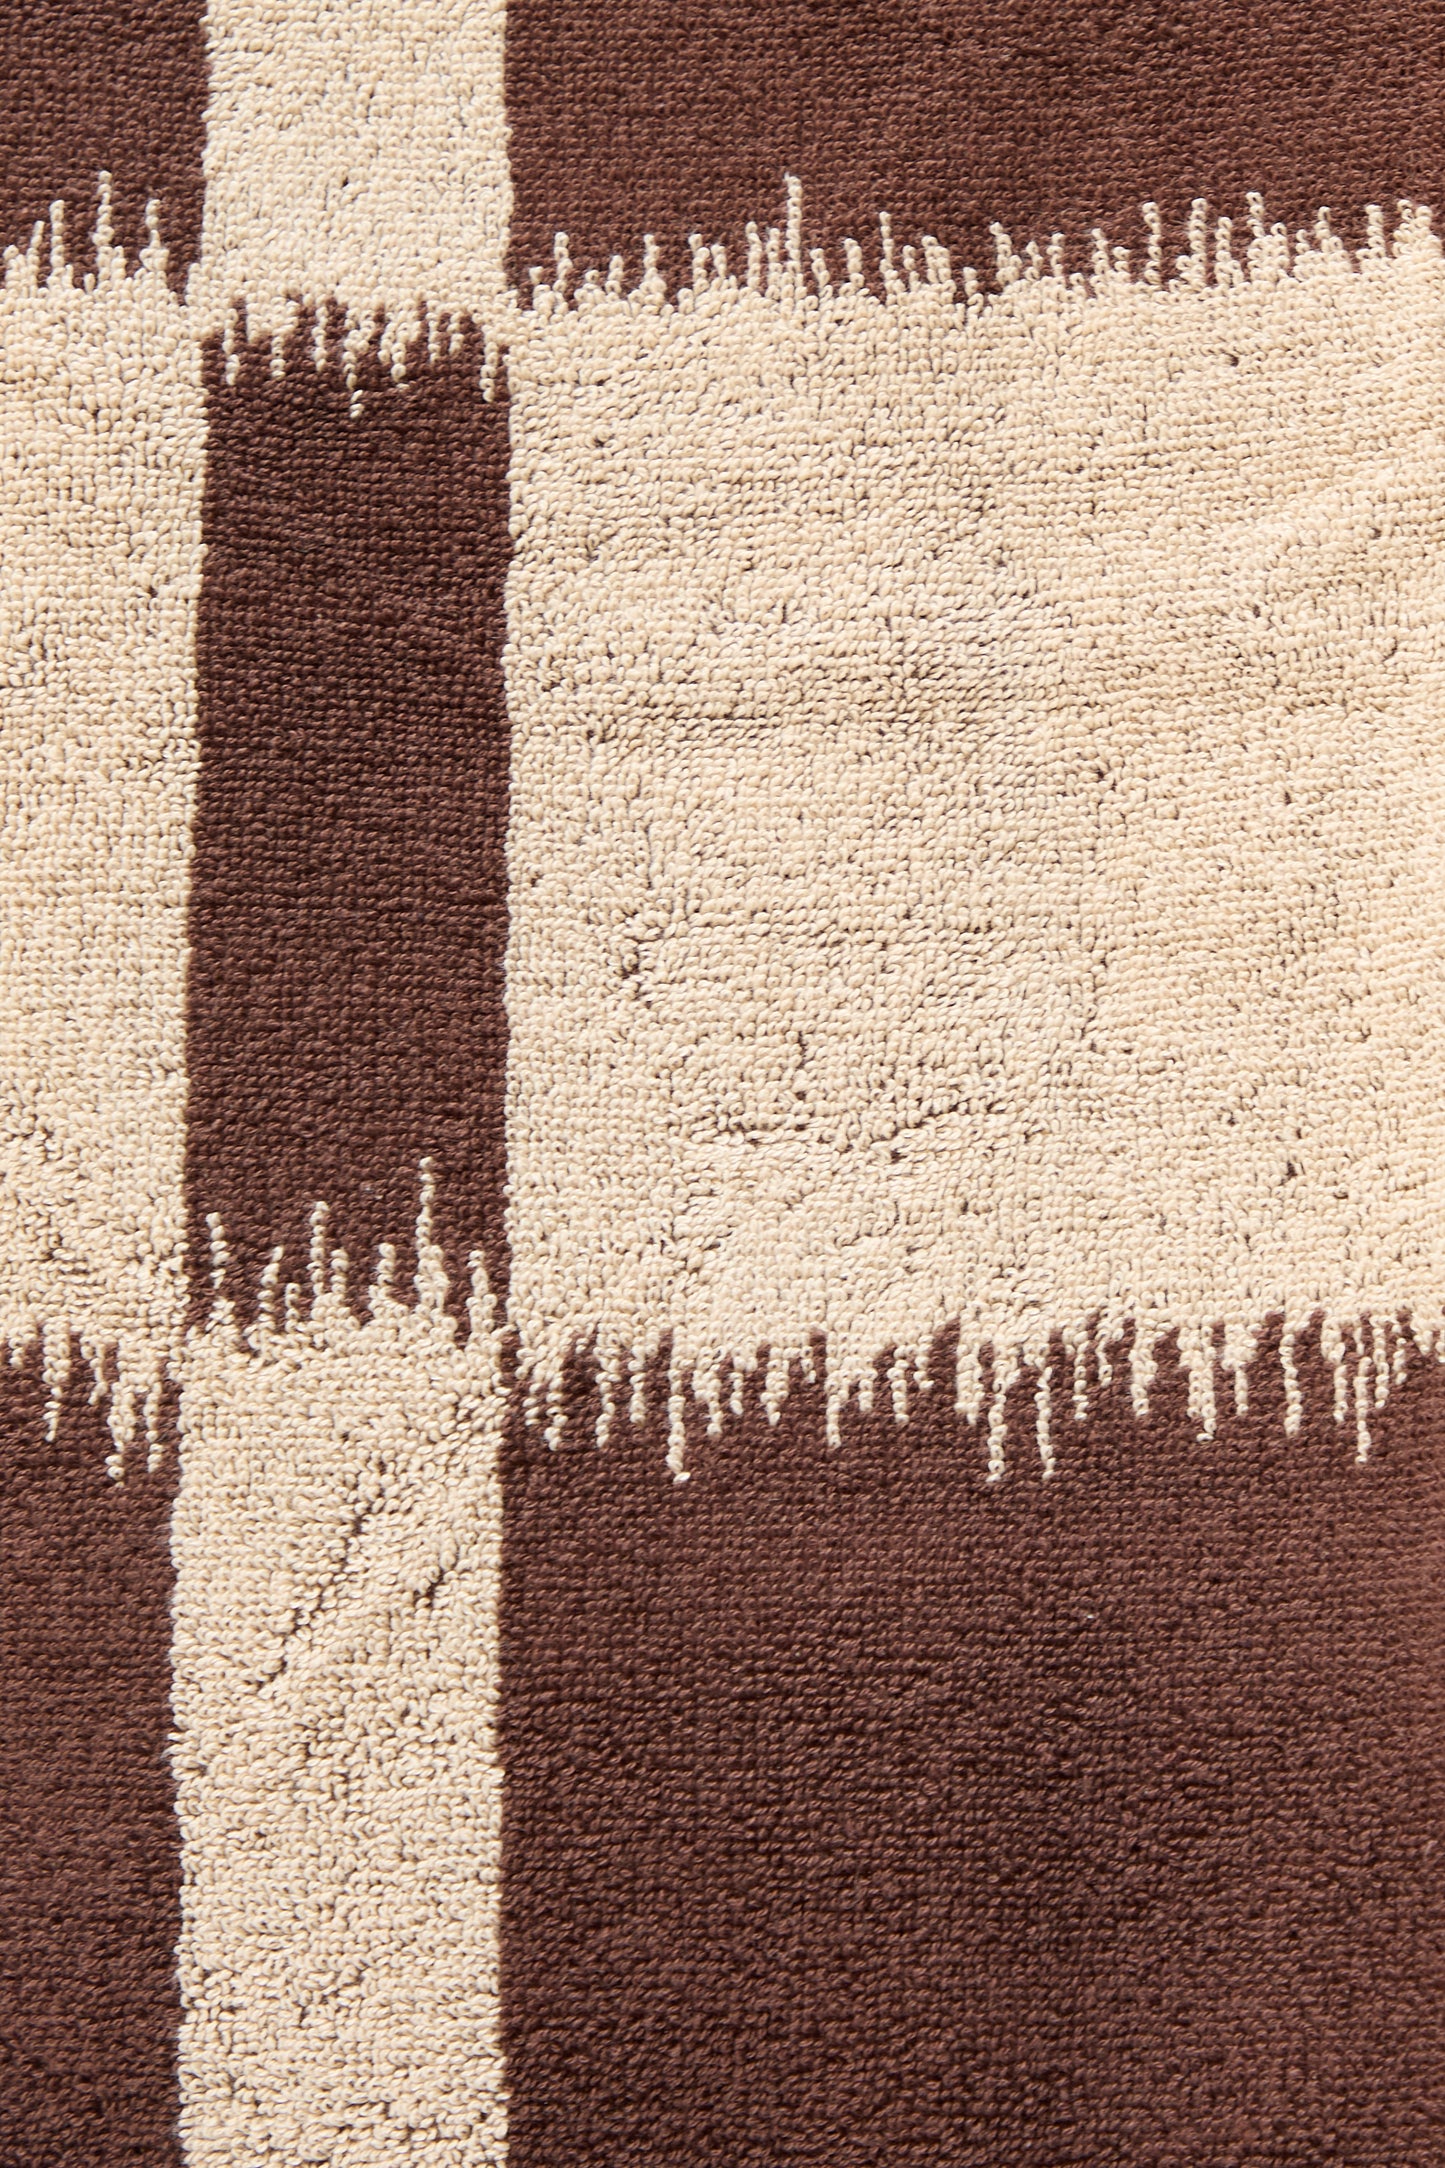 Close-up of a textured fabric with abstract Ikat weaving patterns in brown and cream, like the Autumn Sonata Karin Hand Towel.